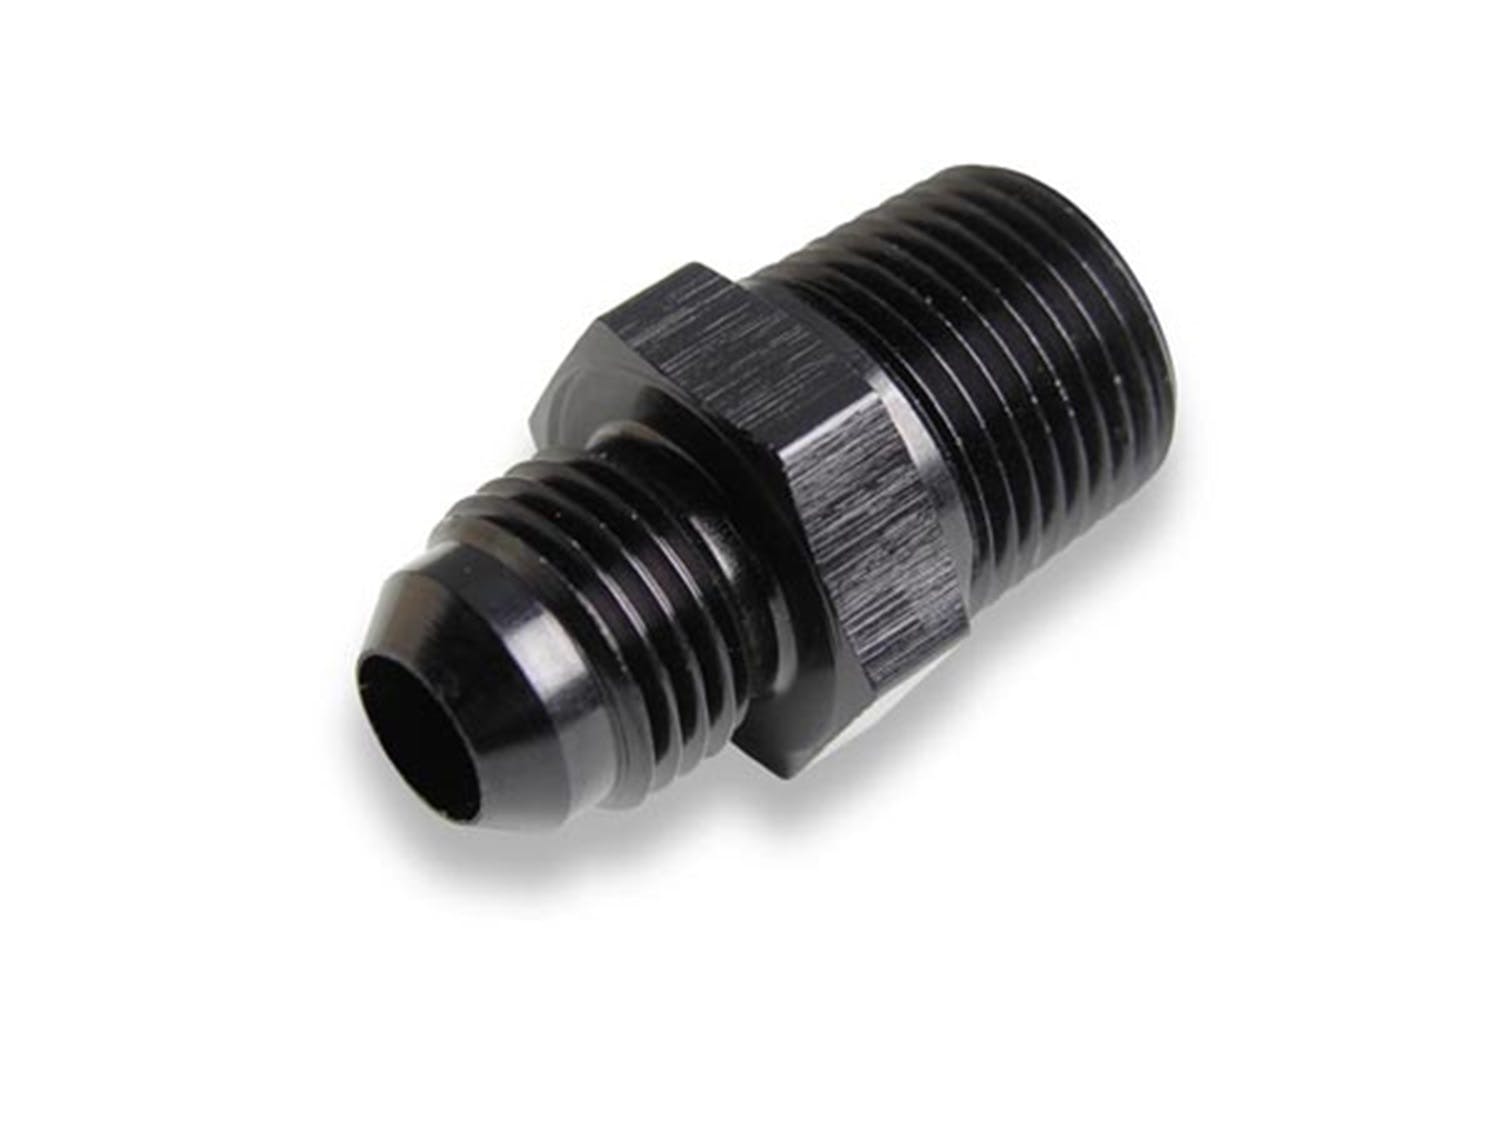 NOS 17959NOS -4AN TO 1/8 NPT ADAPTER, STRAIGHT, BLACK